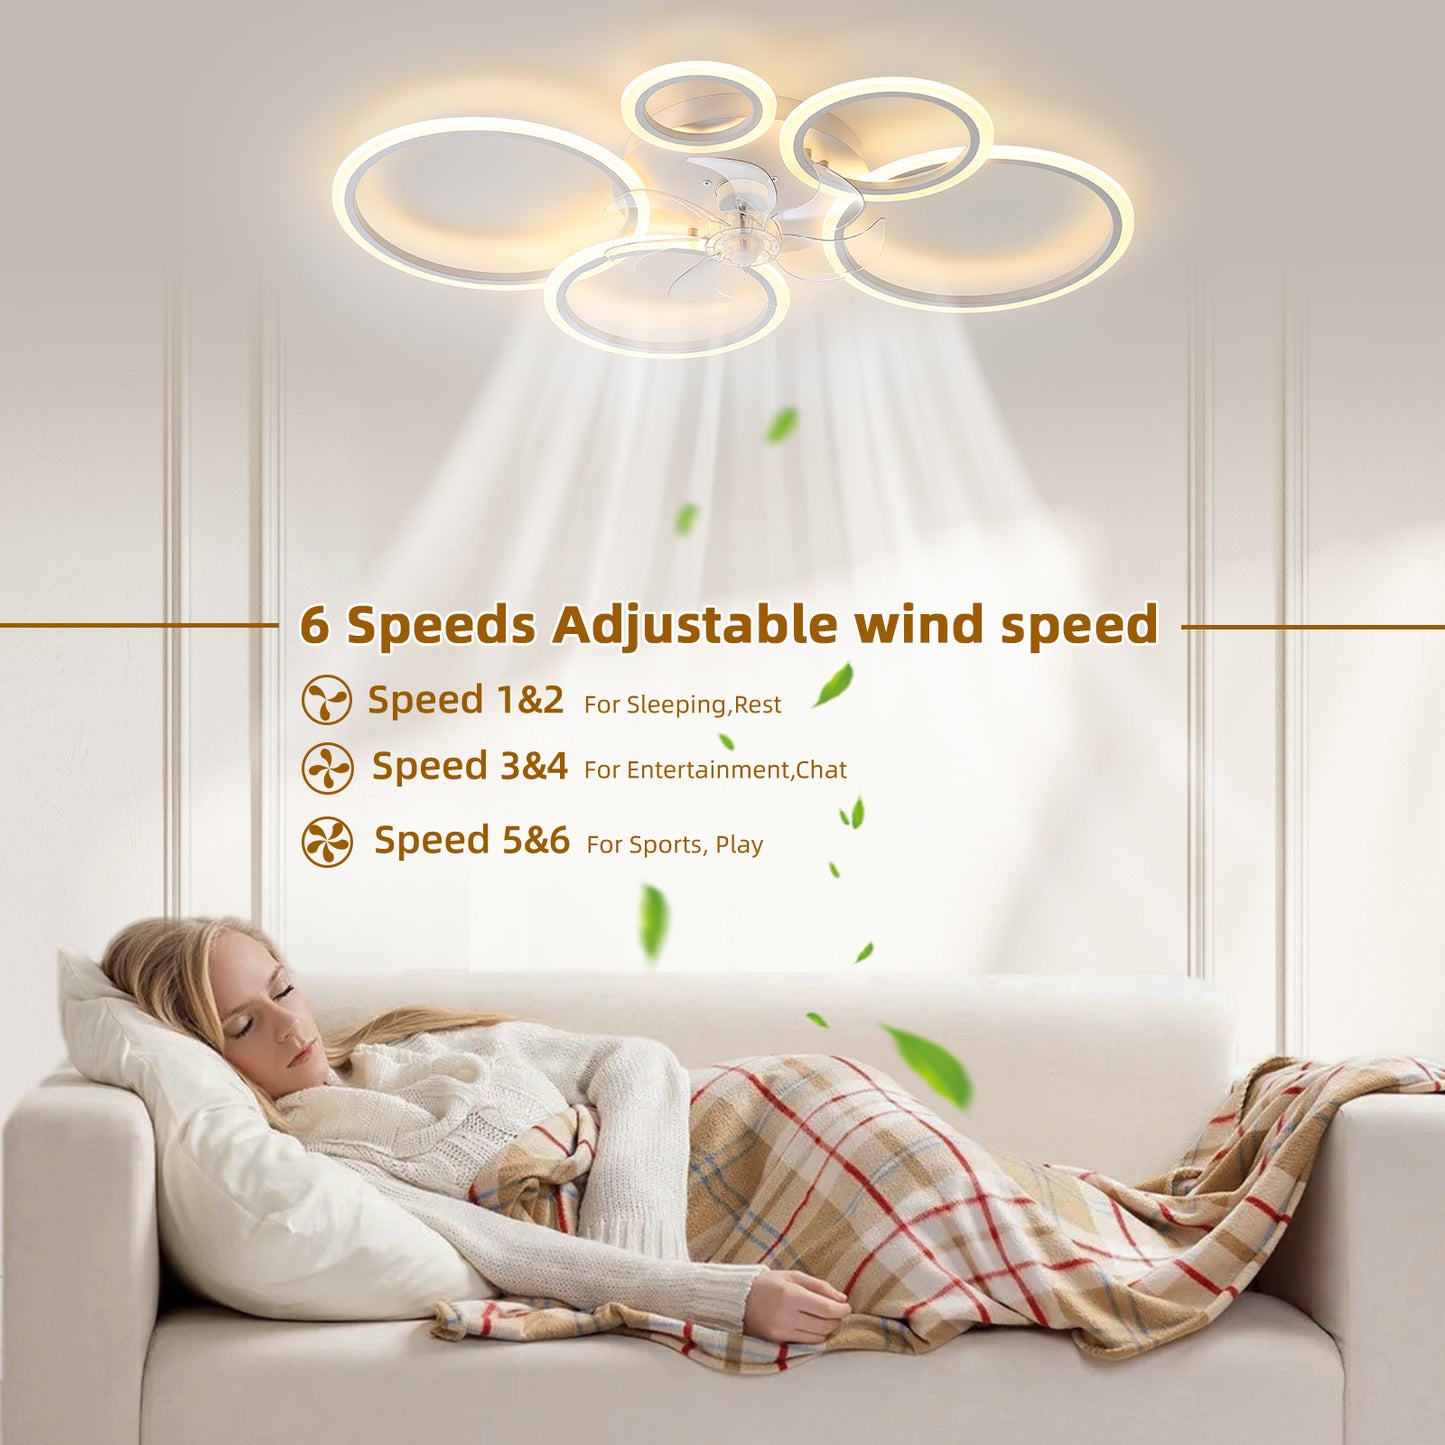 White Ceiling Fan with Dimmable LED Lighting, Reversible Motor, and Remote Control - 39